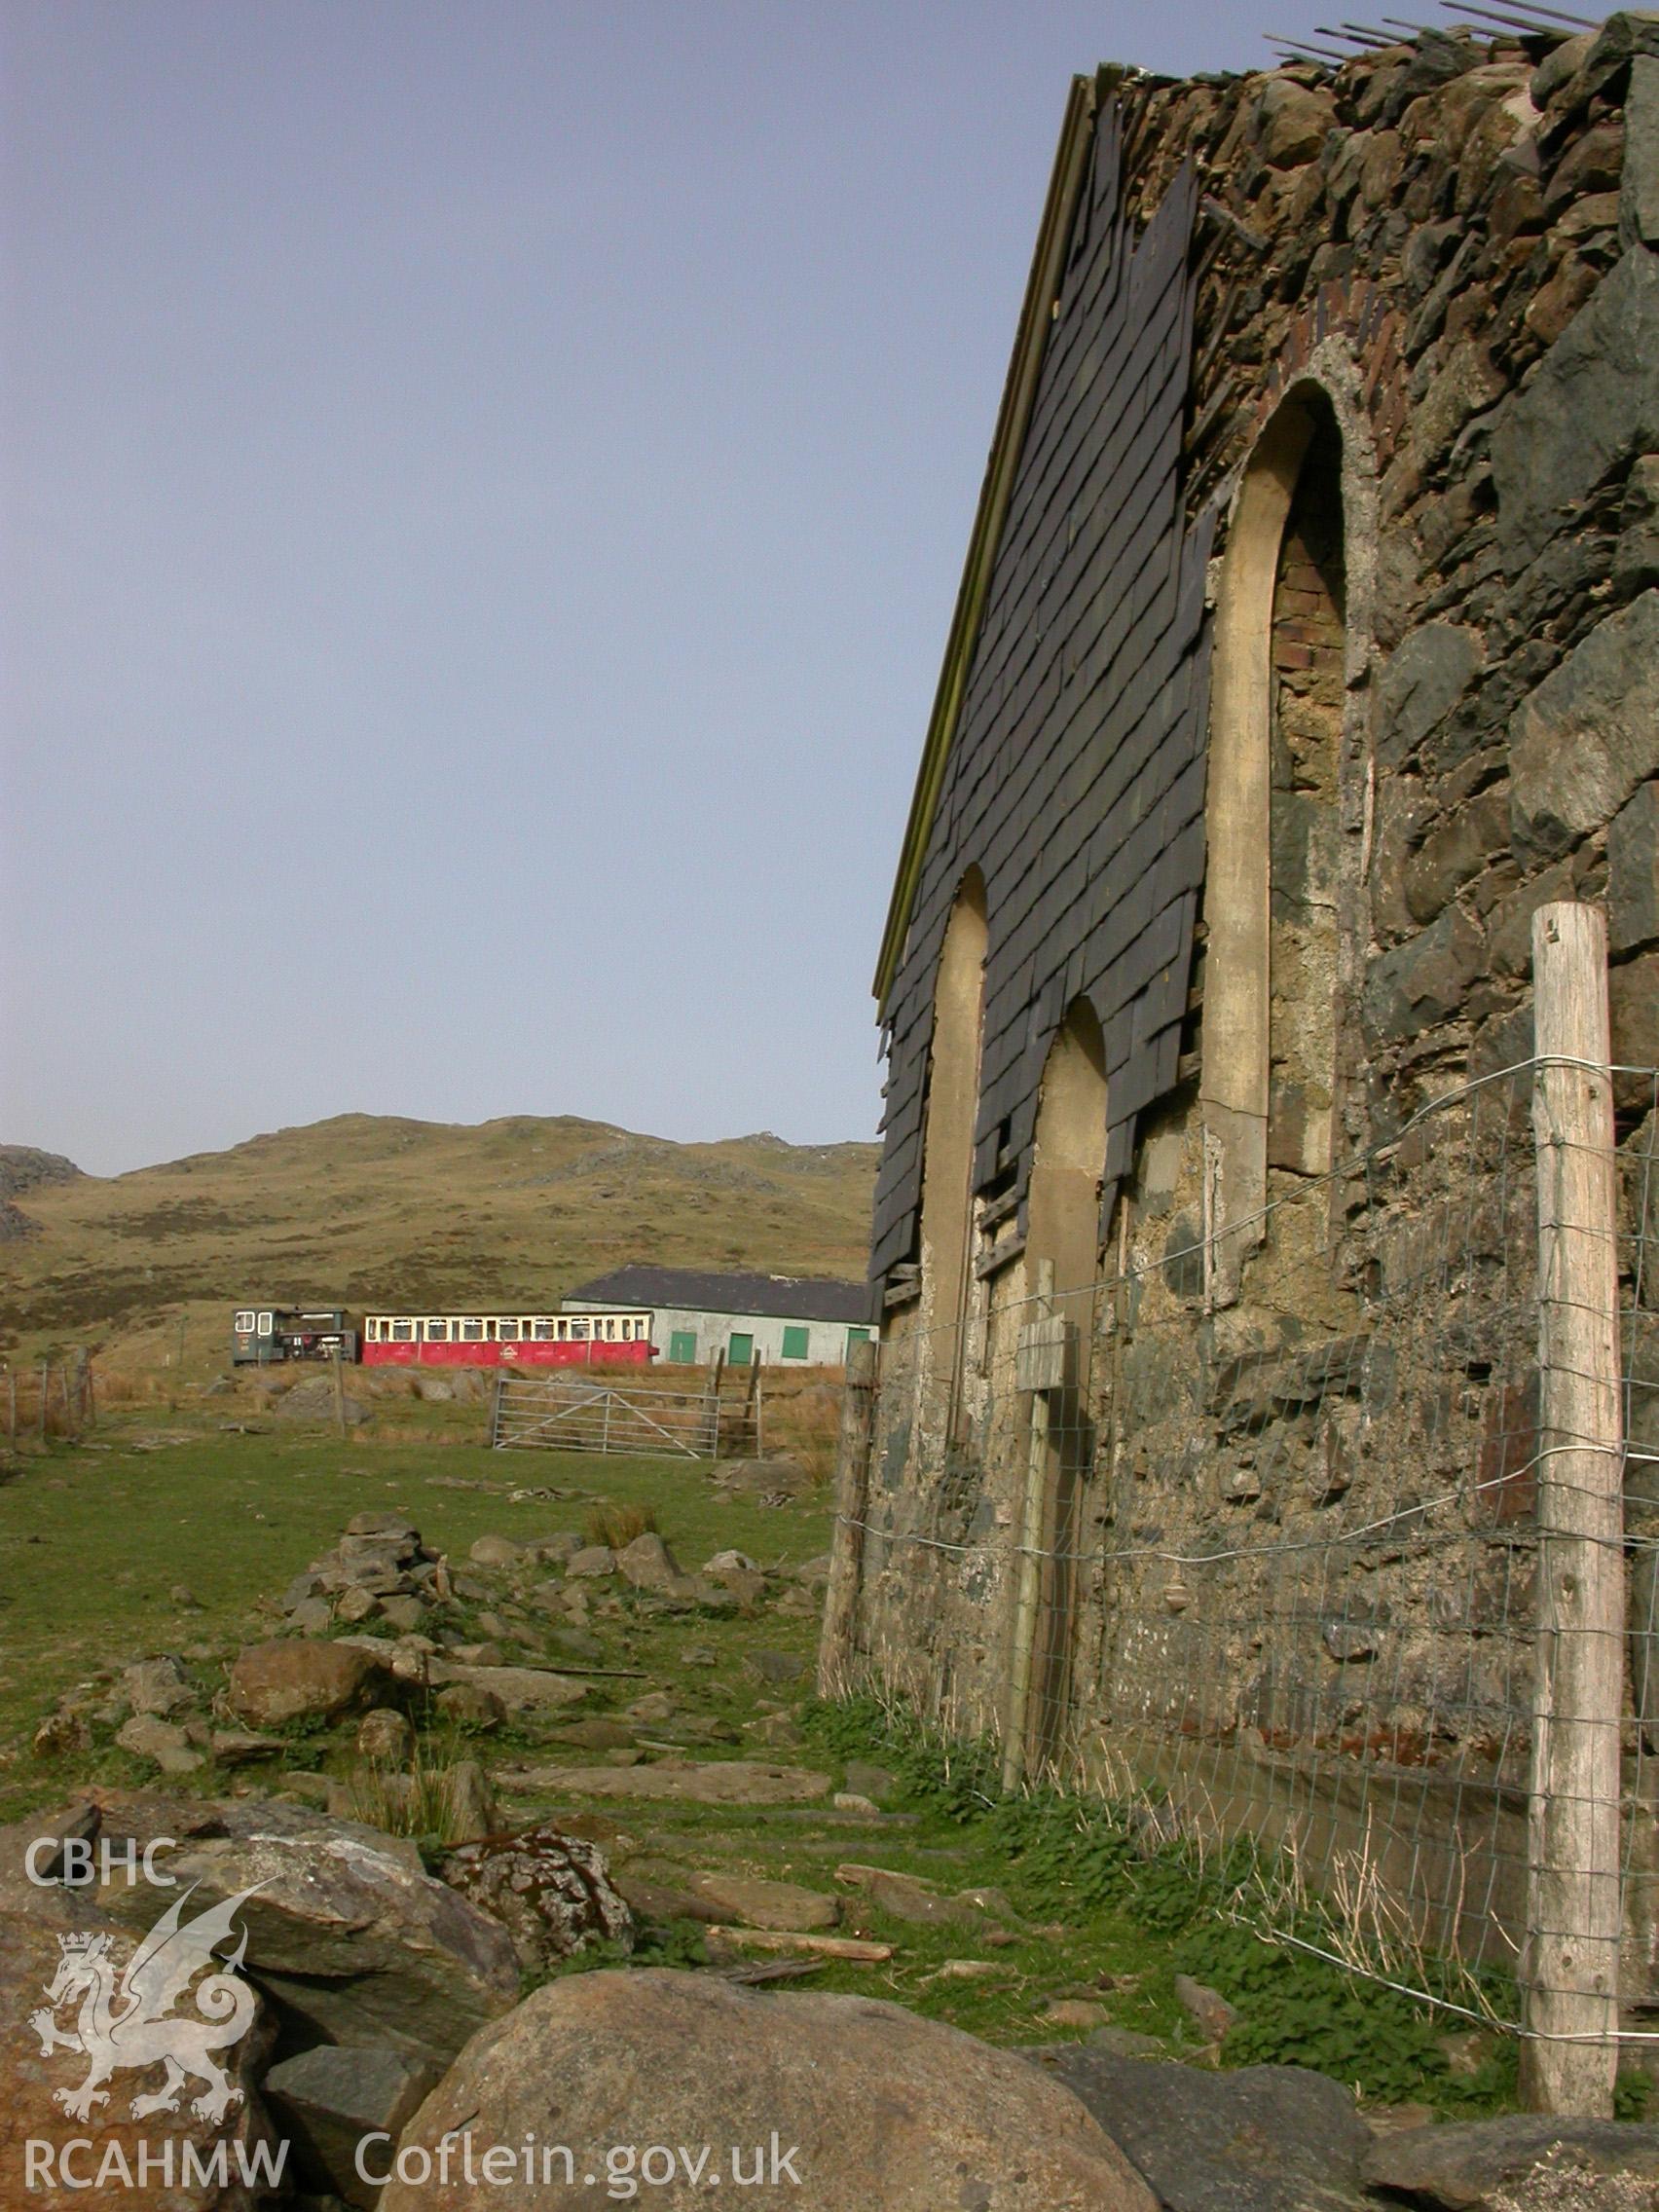 Exterior,  chapel front & mountain railway train at Hebron station